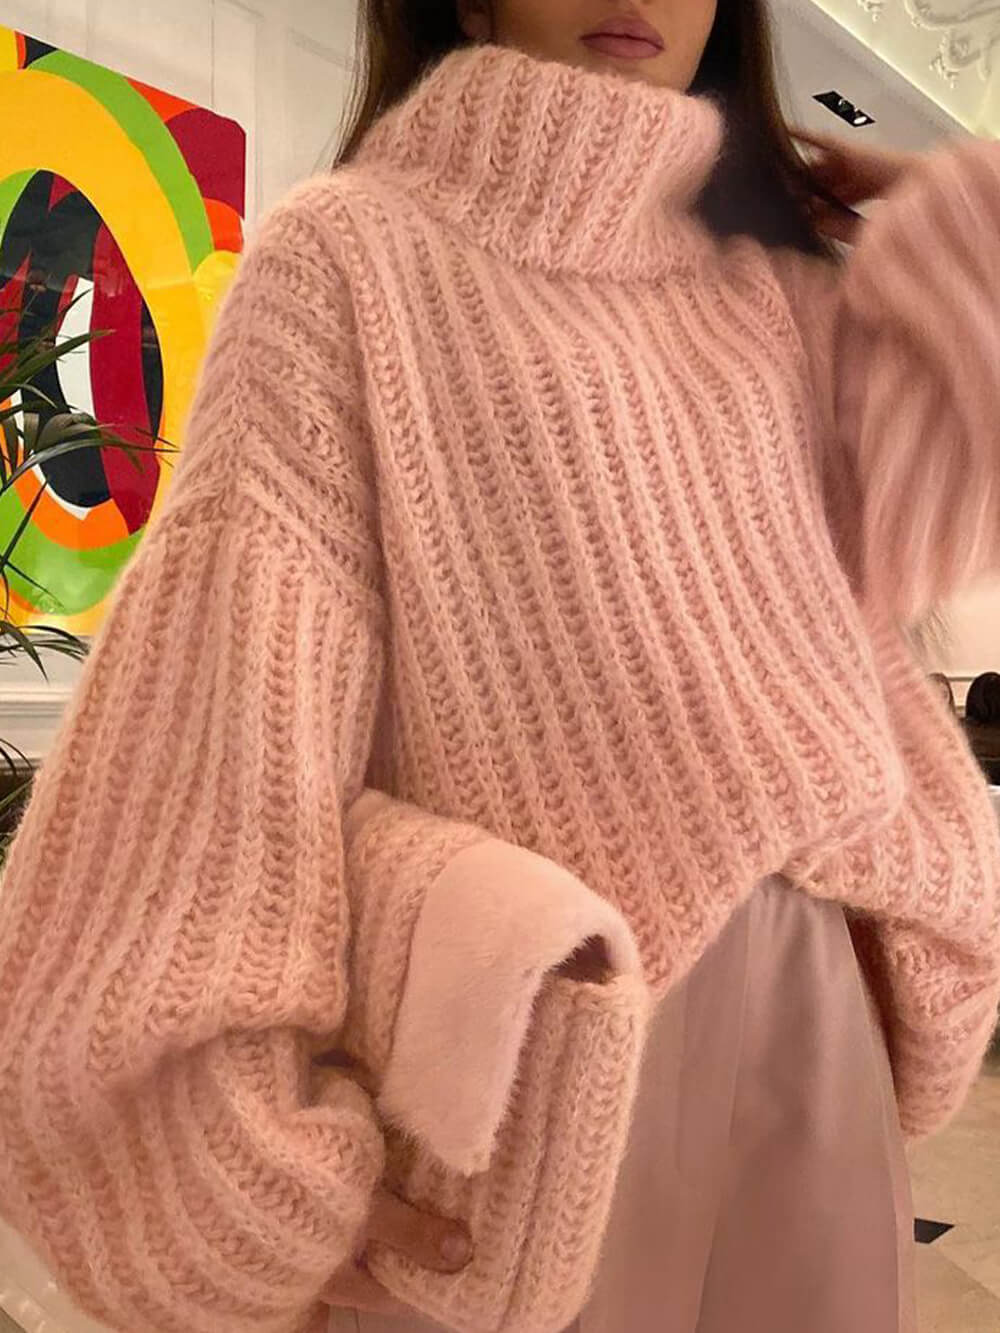 Solid Color Long Sleeve Sweater